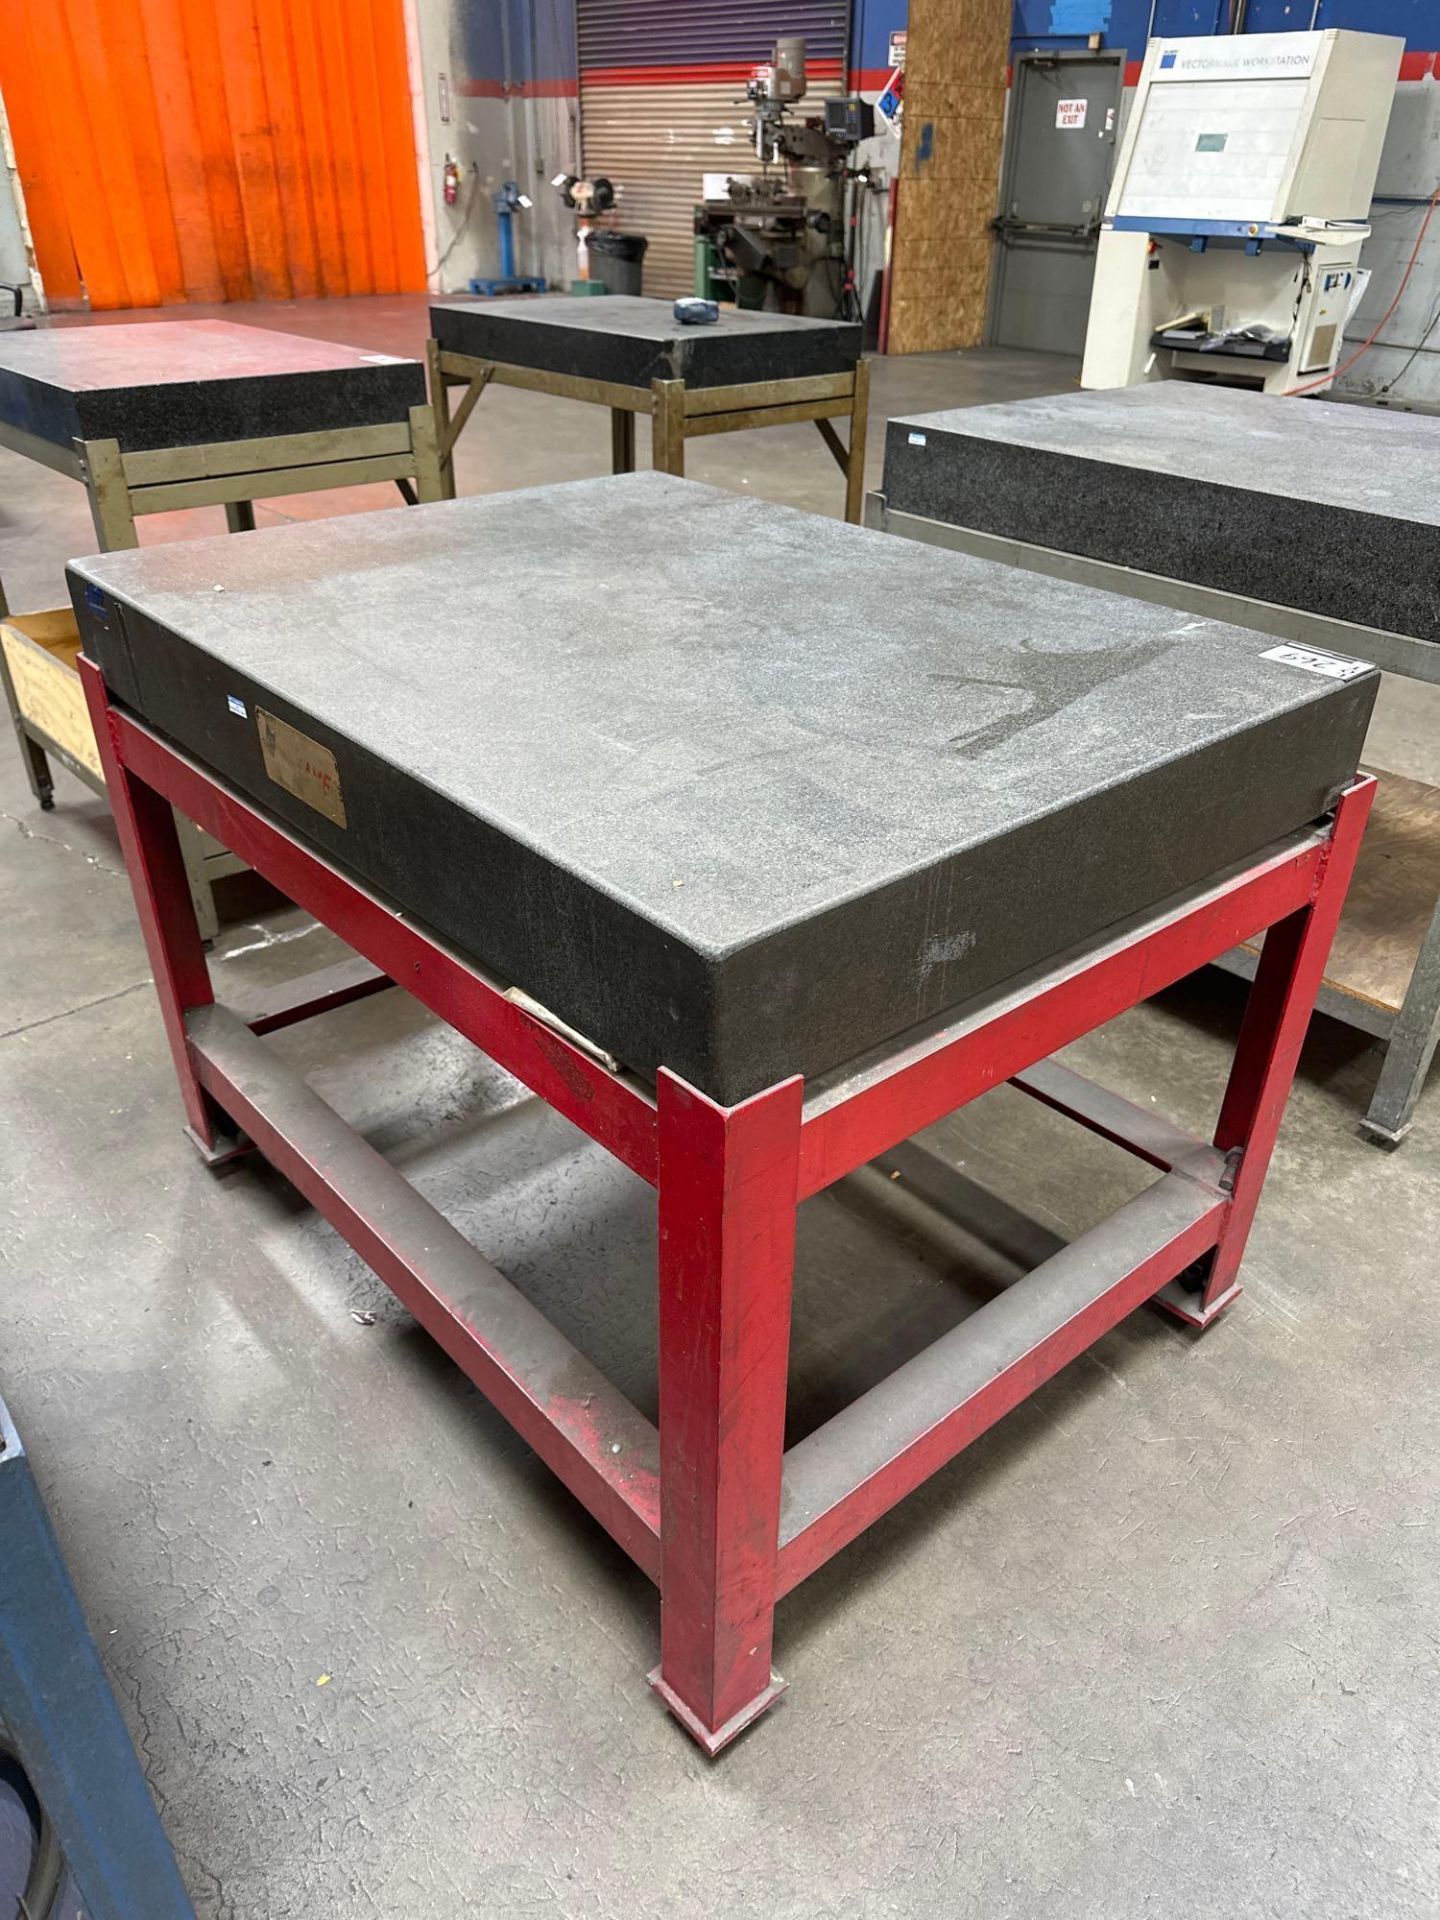 6” x 36” x 48” Granite Surface Plate w/ Steel Stand - Image 4 of 4